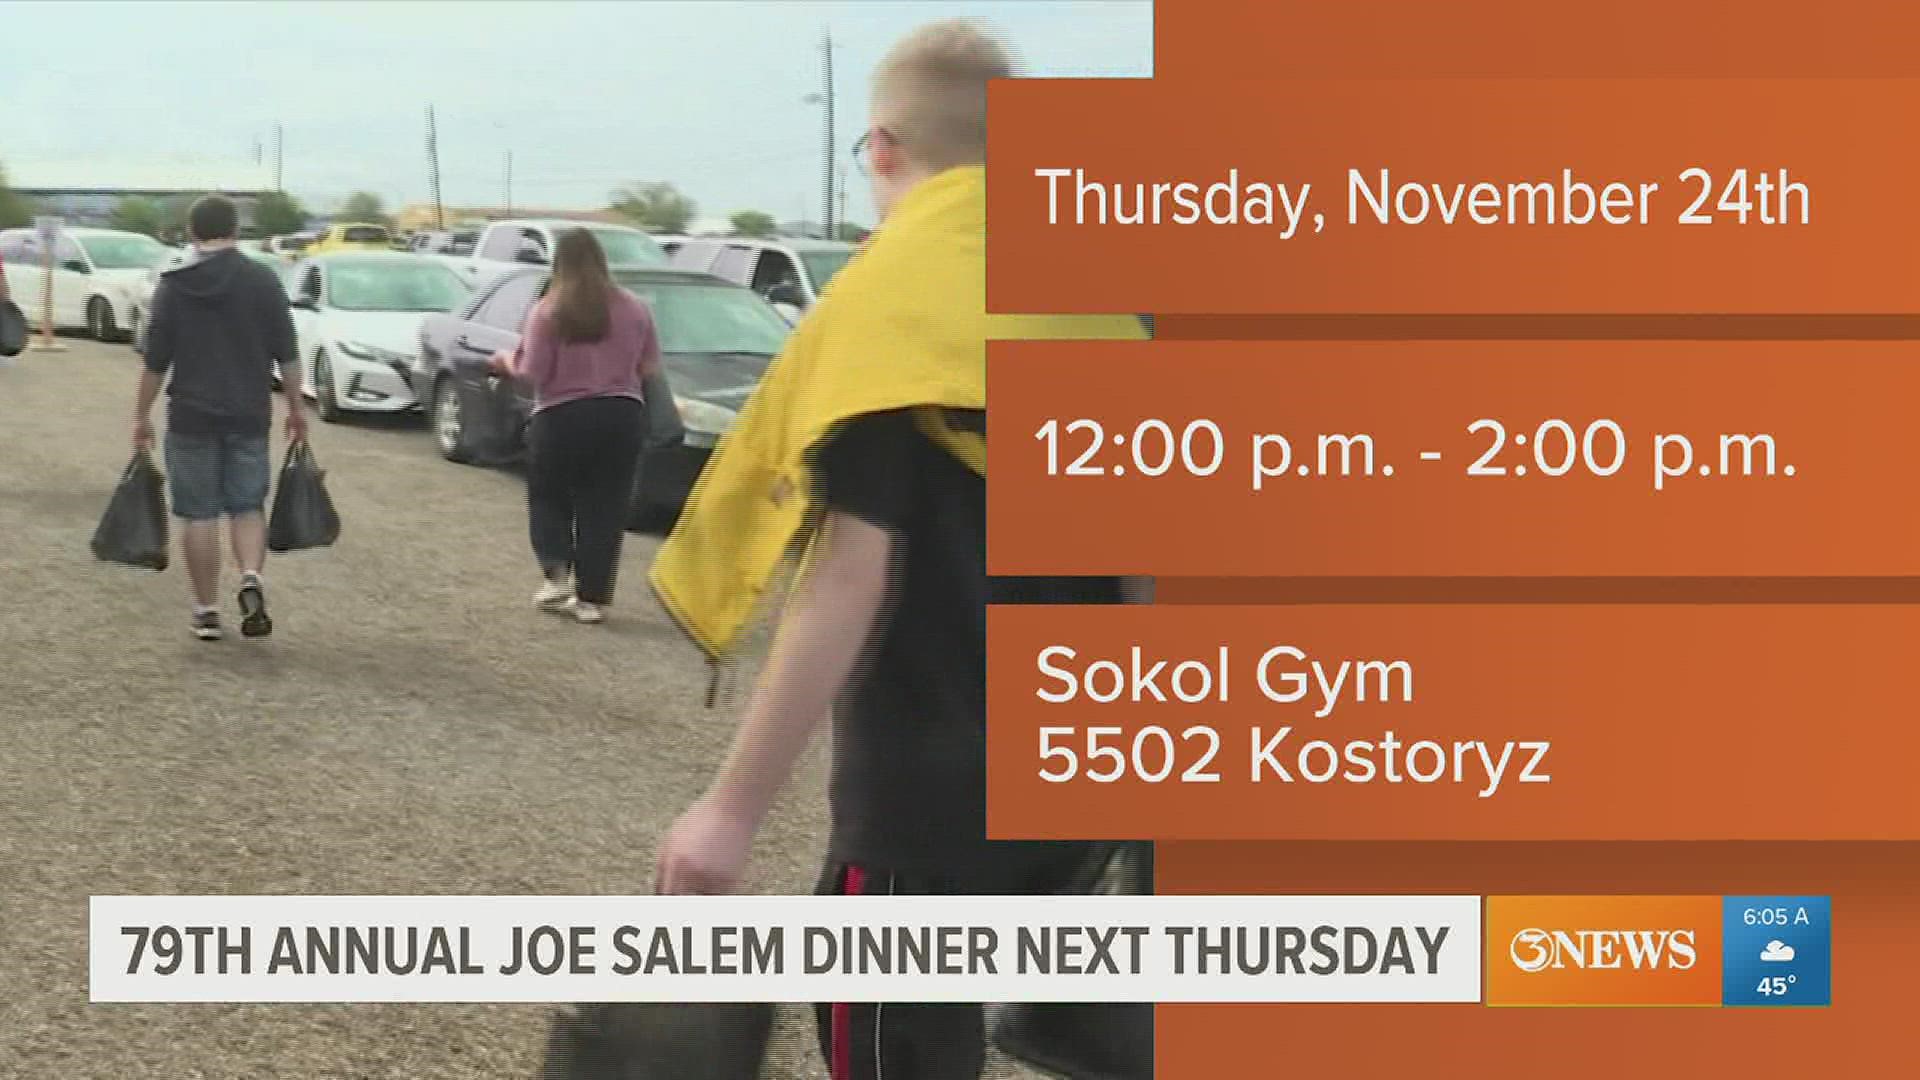 Those who want to get a plate can line up at Sokol Gym on Kostoryz next Thursday at 11 a.m.